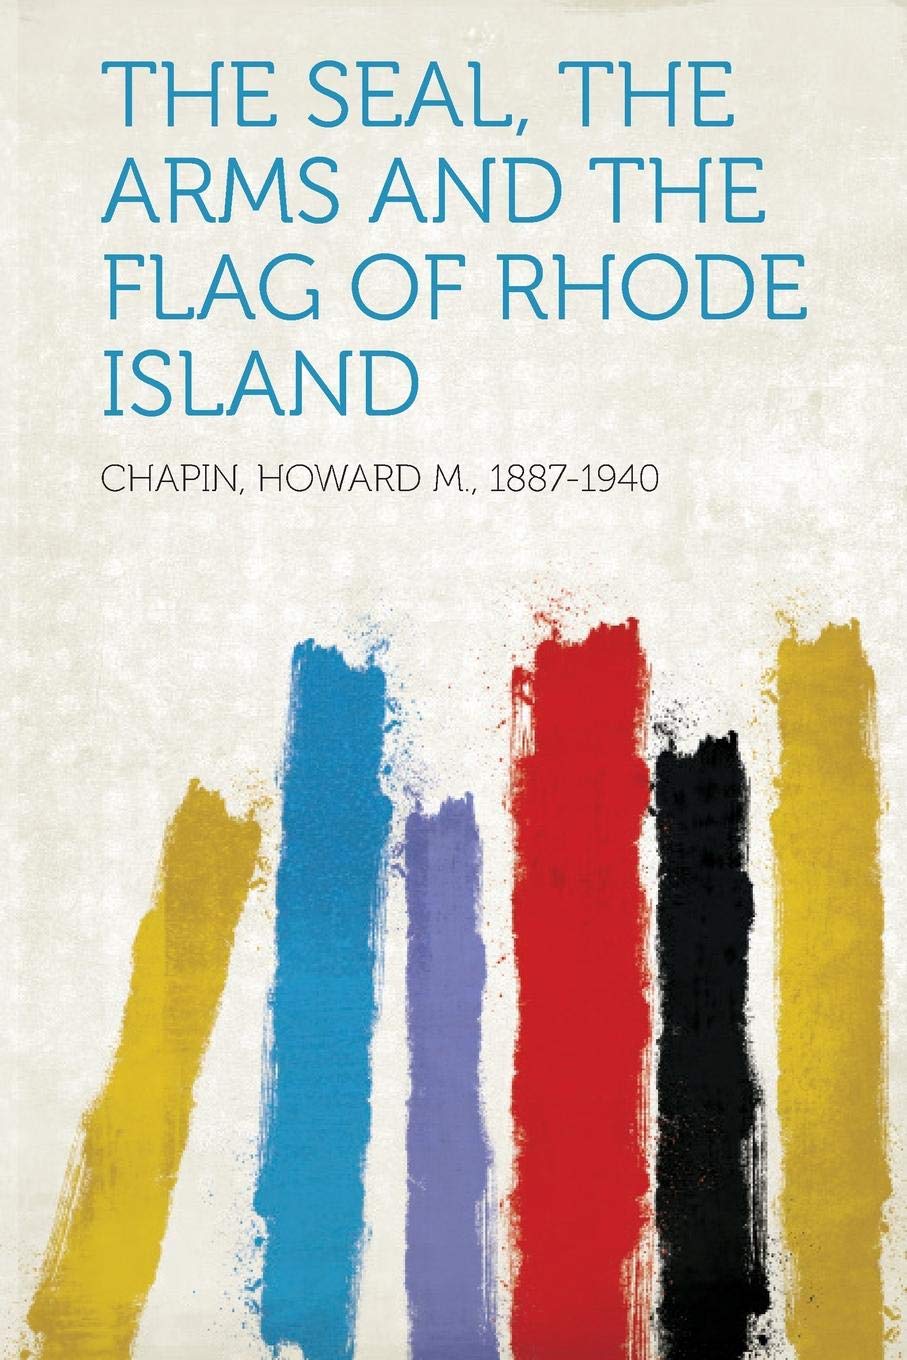 The Seal, the Arms and the Flag of Rhode Island